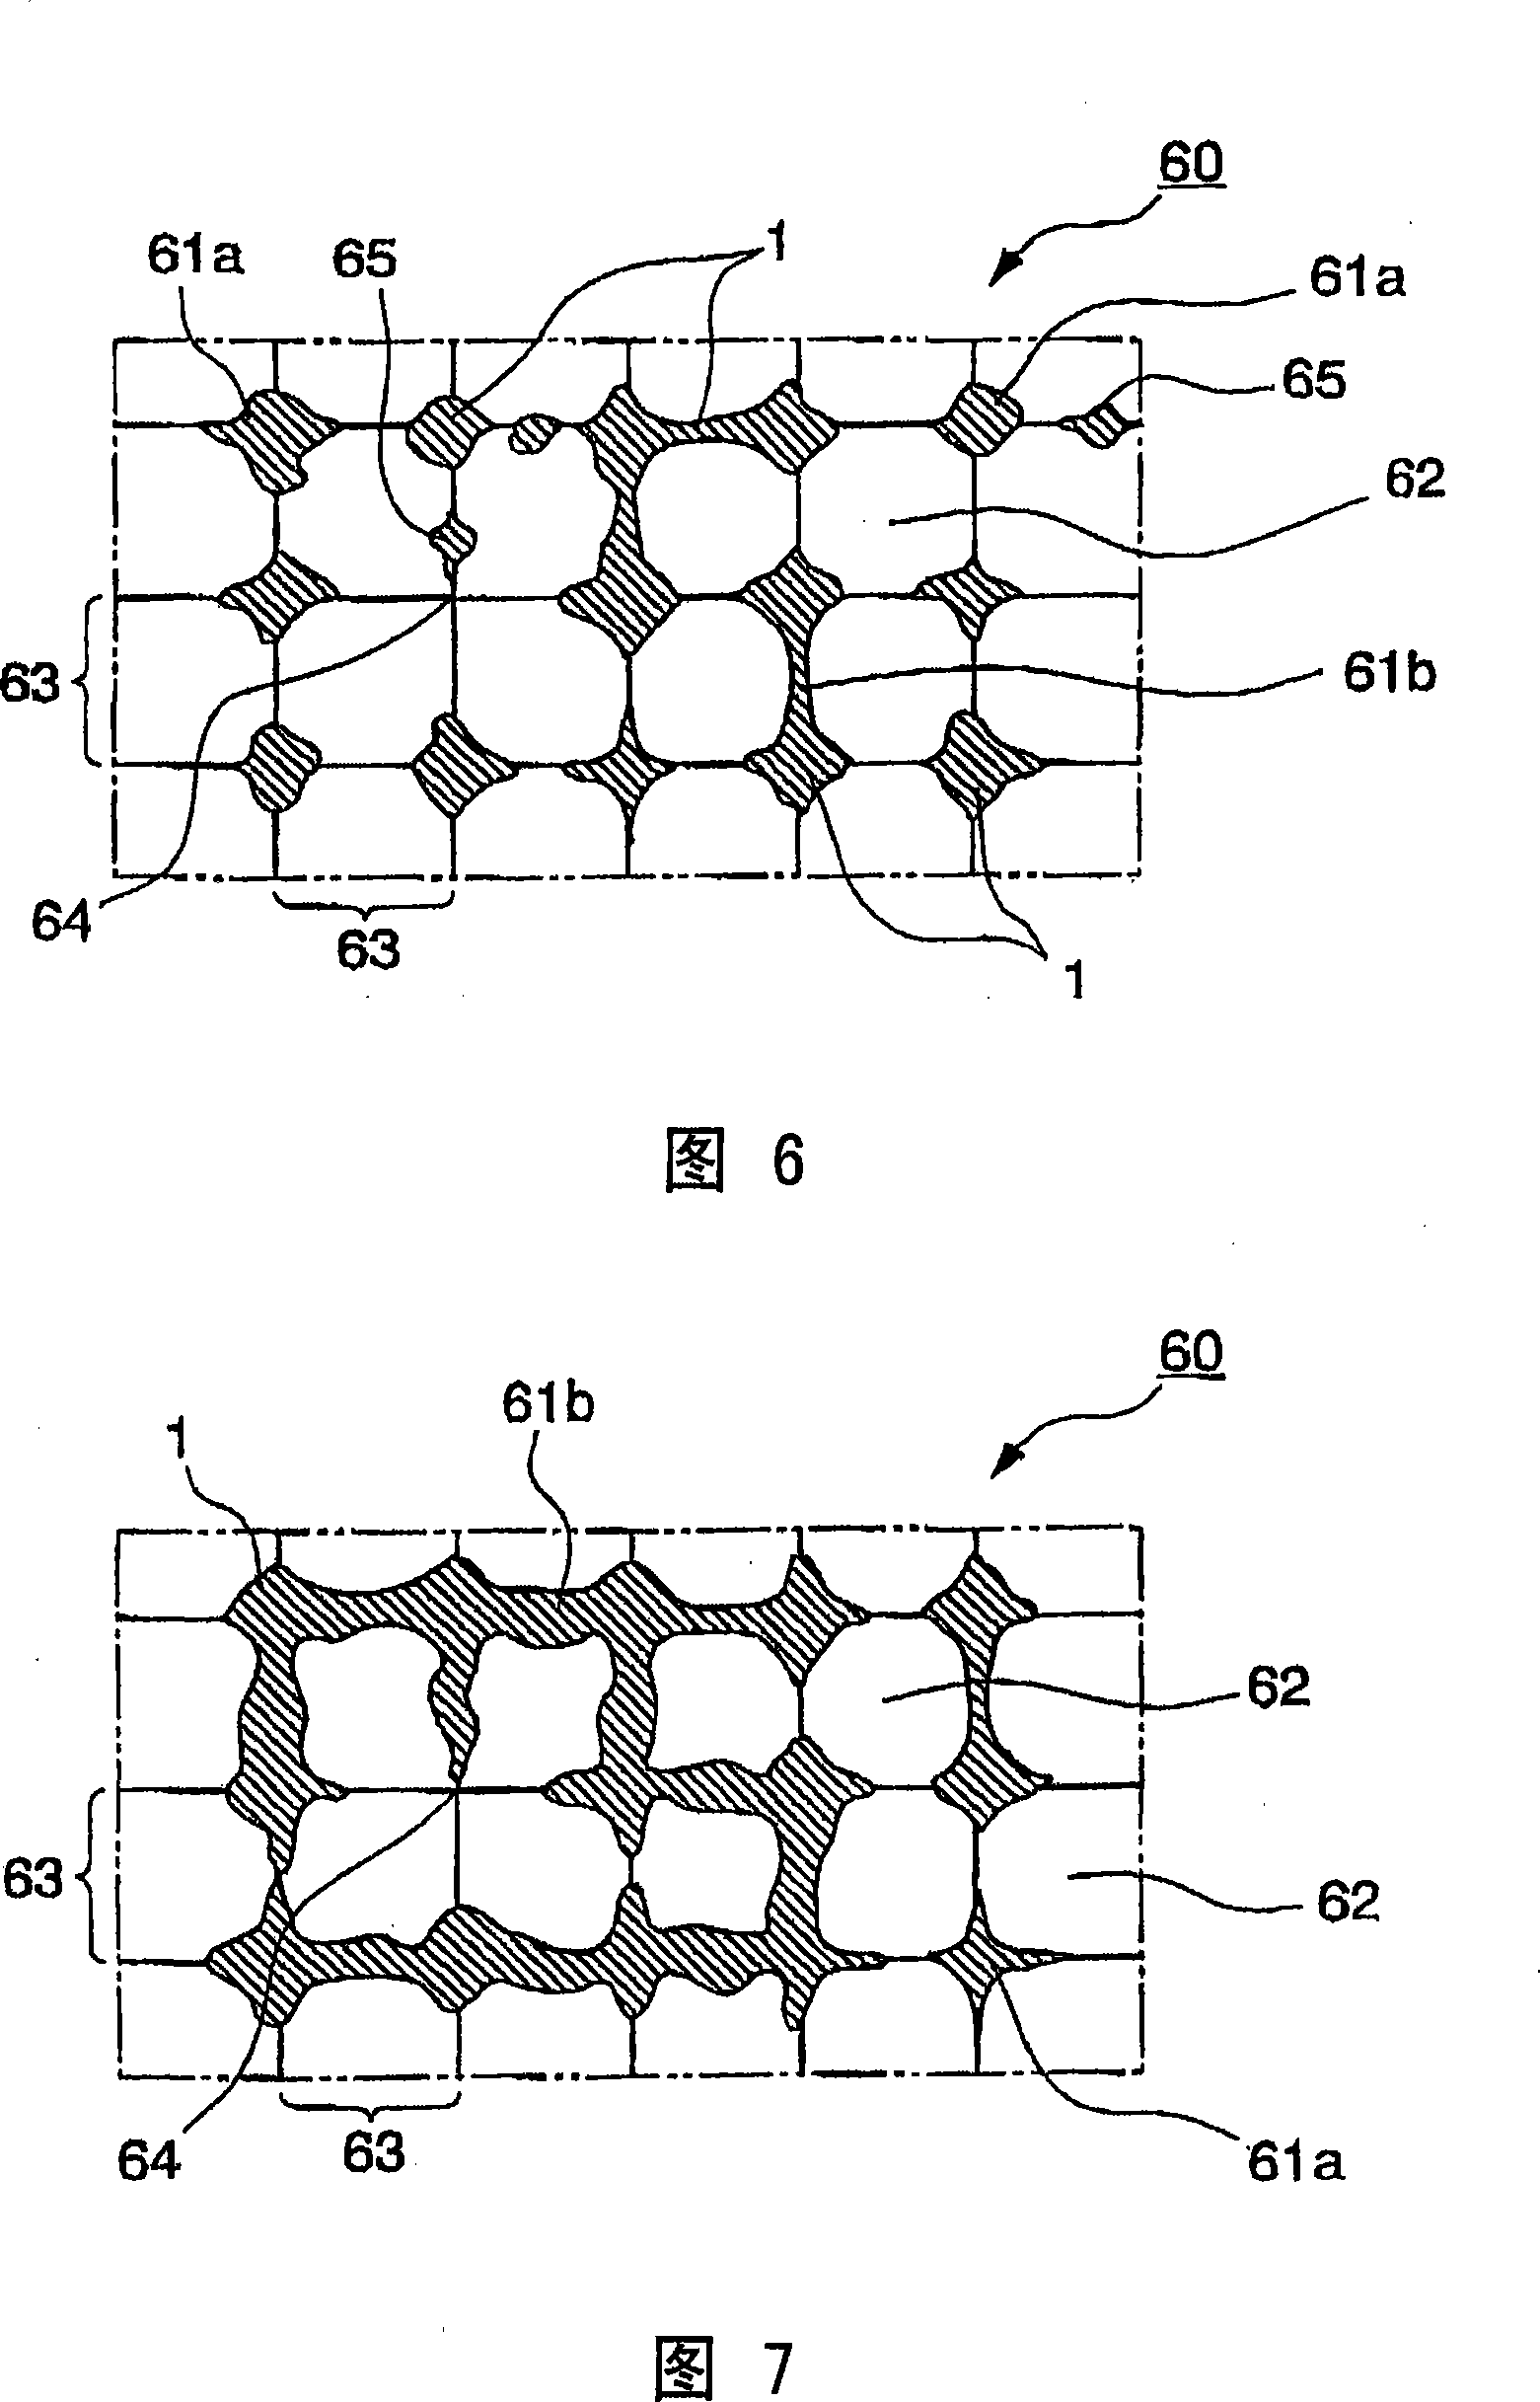 Method for production of fiber-reinforced composite material